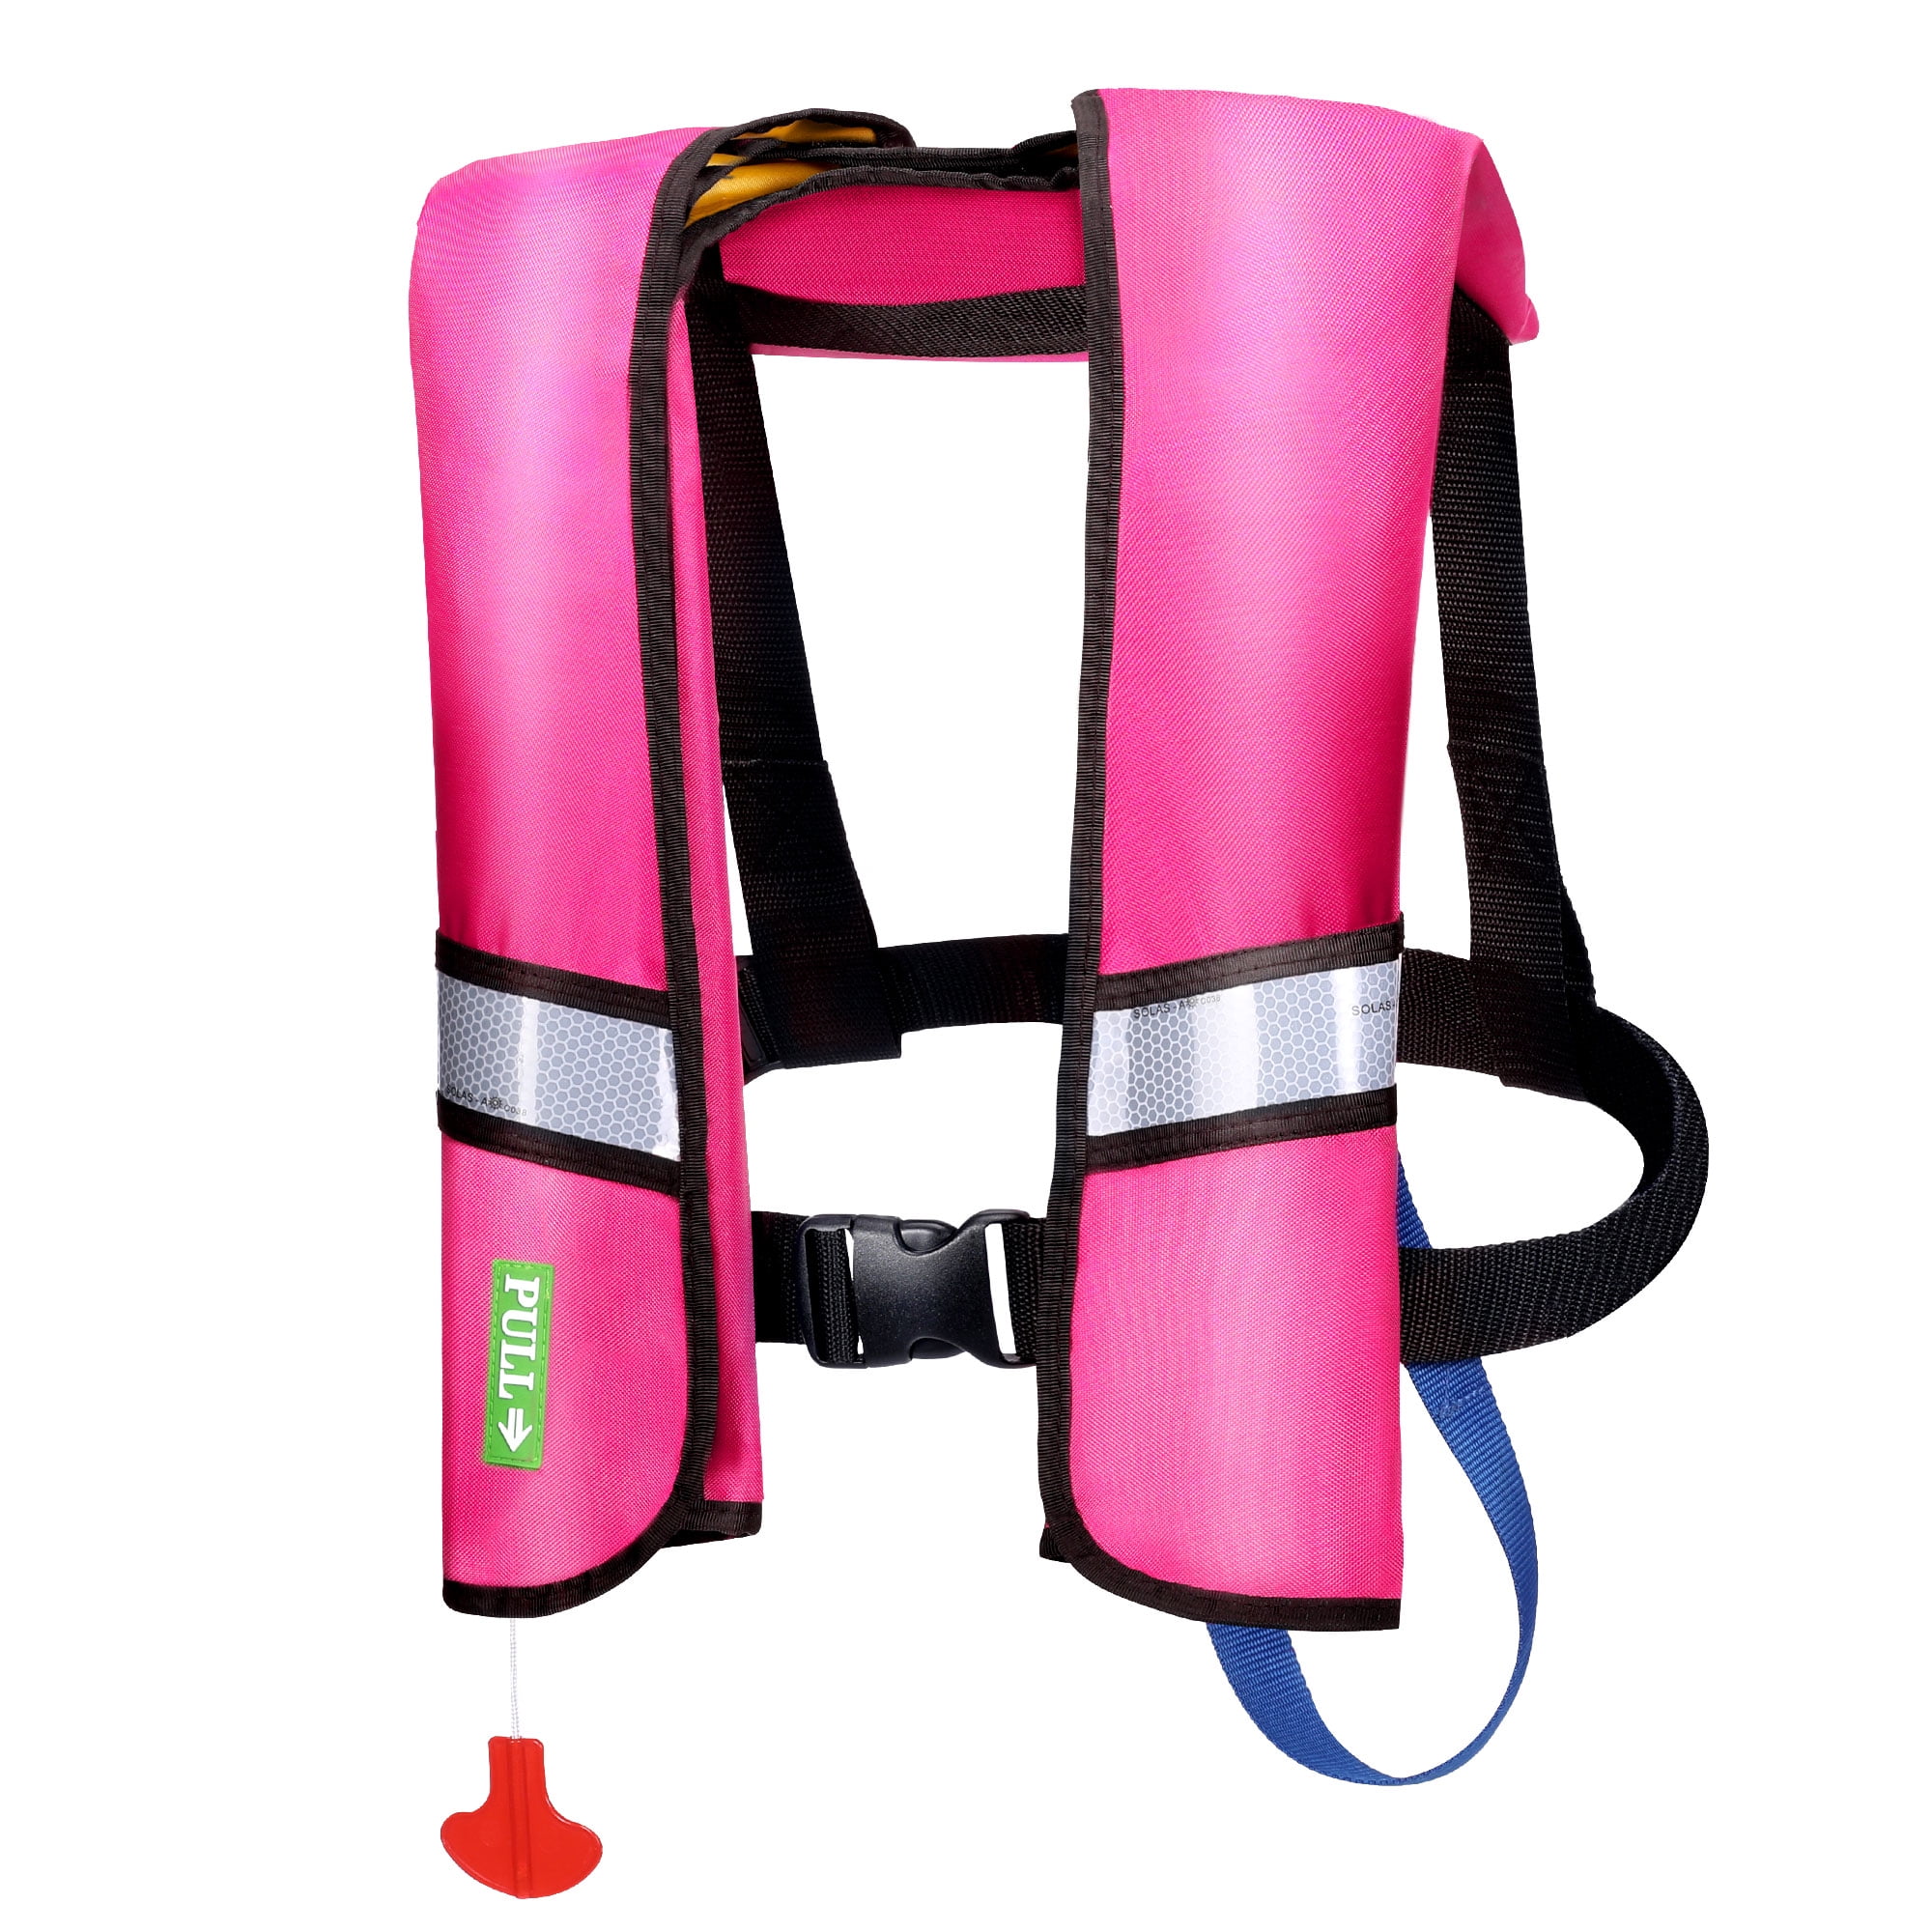 WARMOUNTS Automatic Inflatable Life Jacket with Reflectors & Whistle, Adult  PFD Survival Buoyancy Vest for Boating, Fishing, Sailing, Surfing